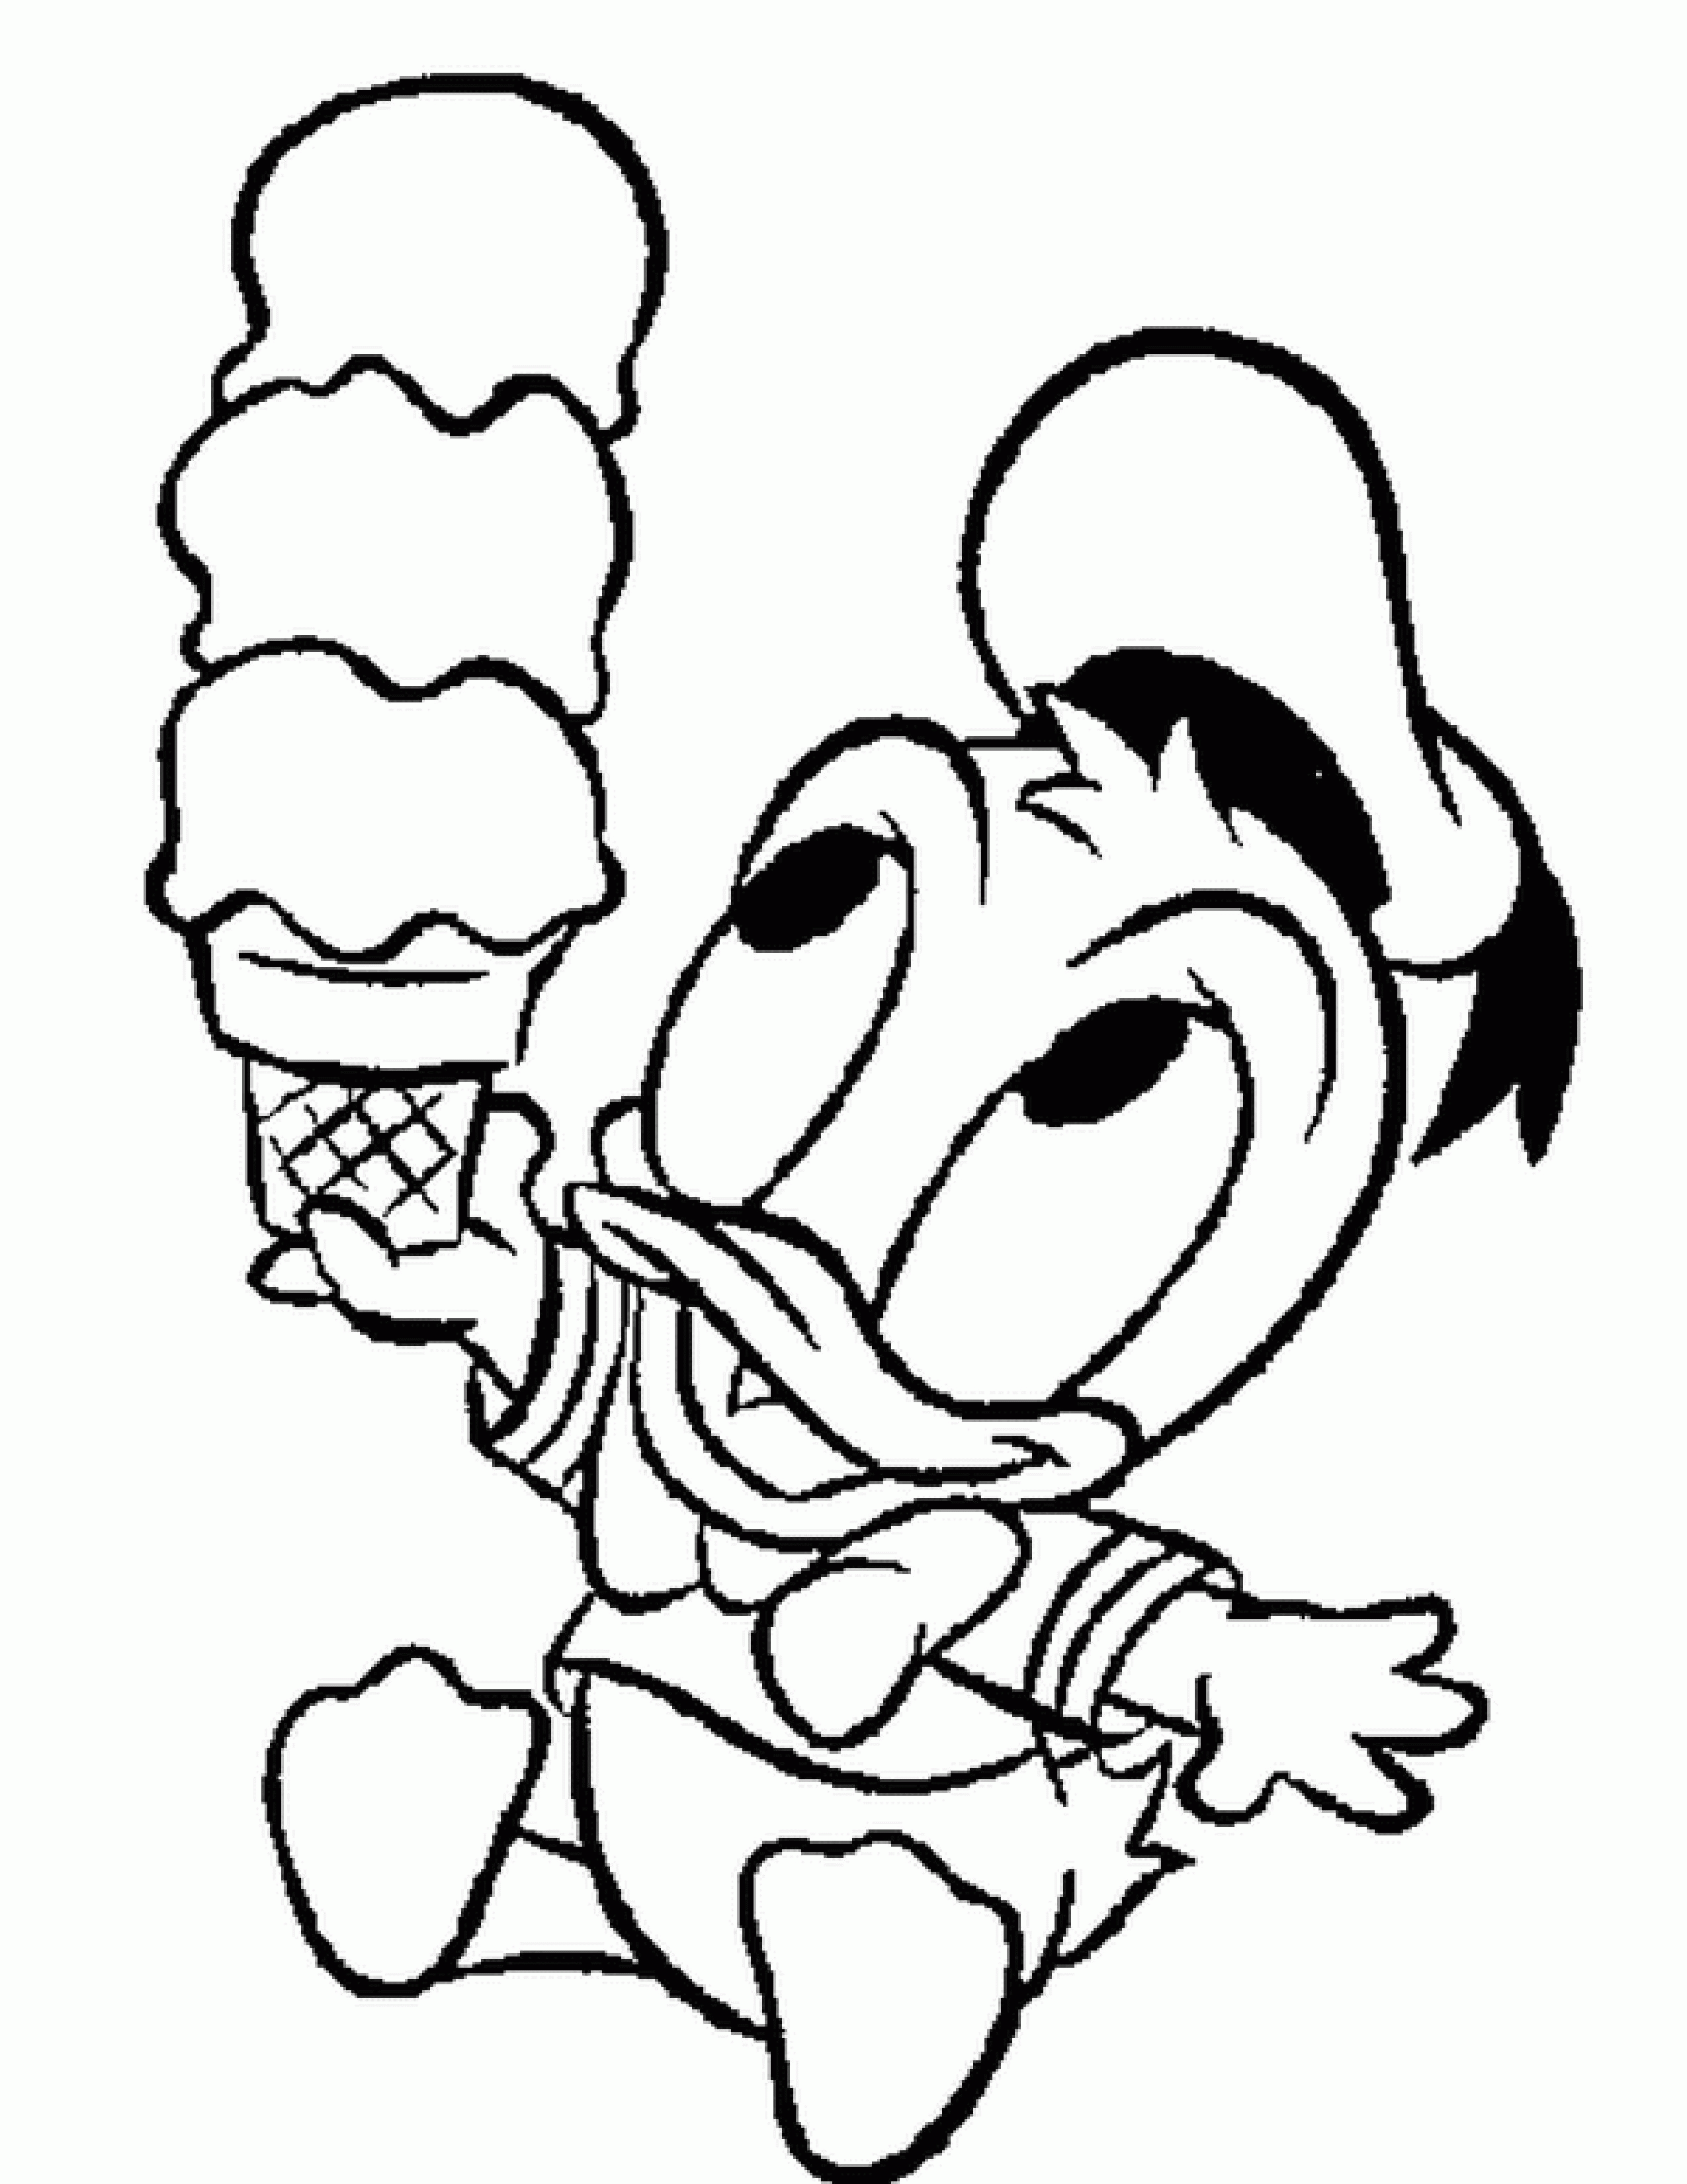 Download Walt Disney World Coloring Pages - Coloring Page Photos - Coloring Home